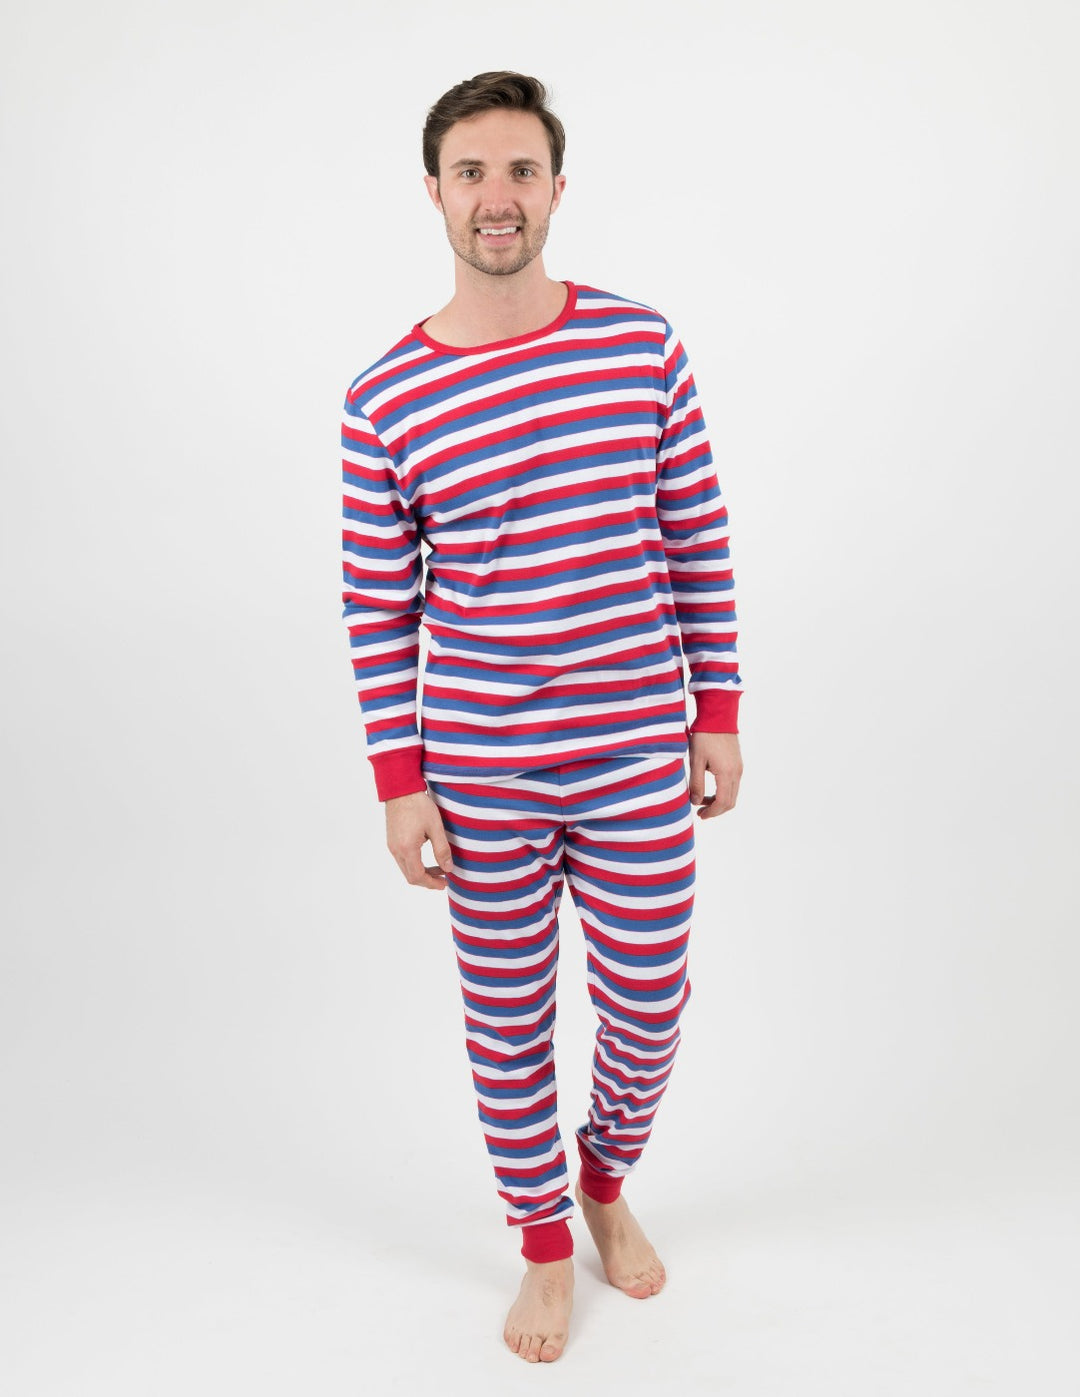 mens red white and blue striped pajamas